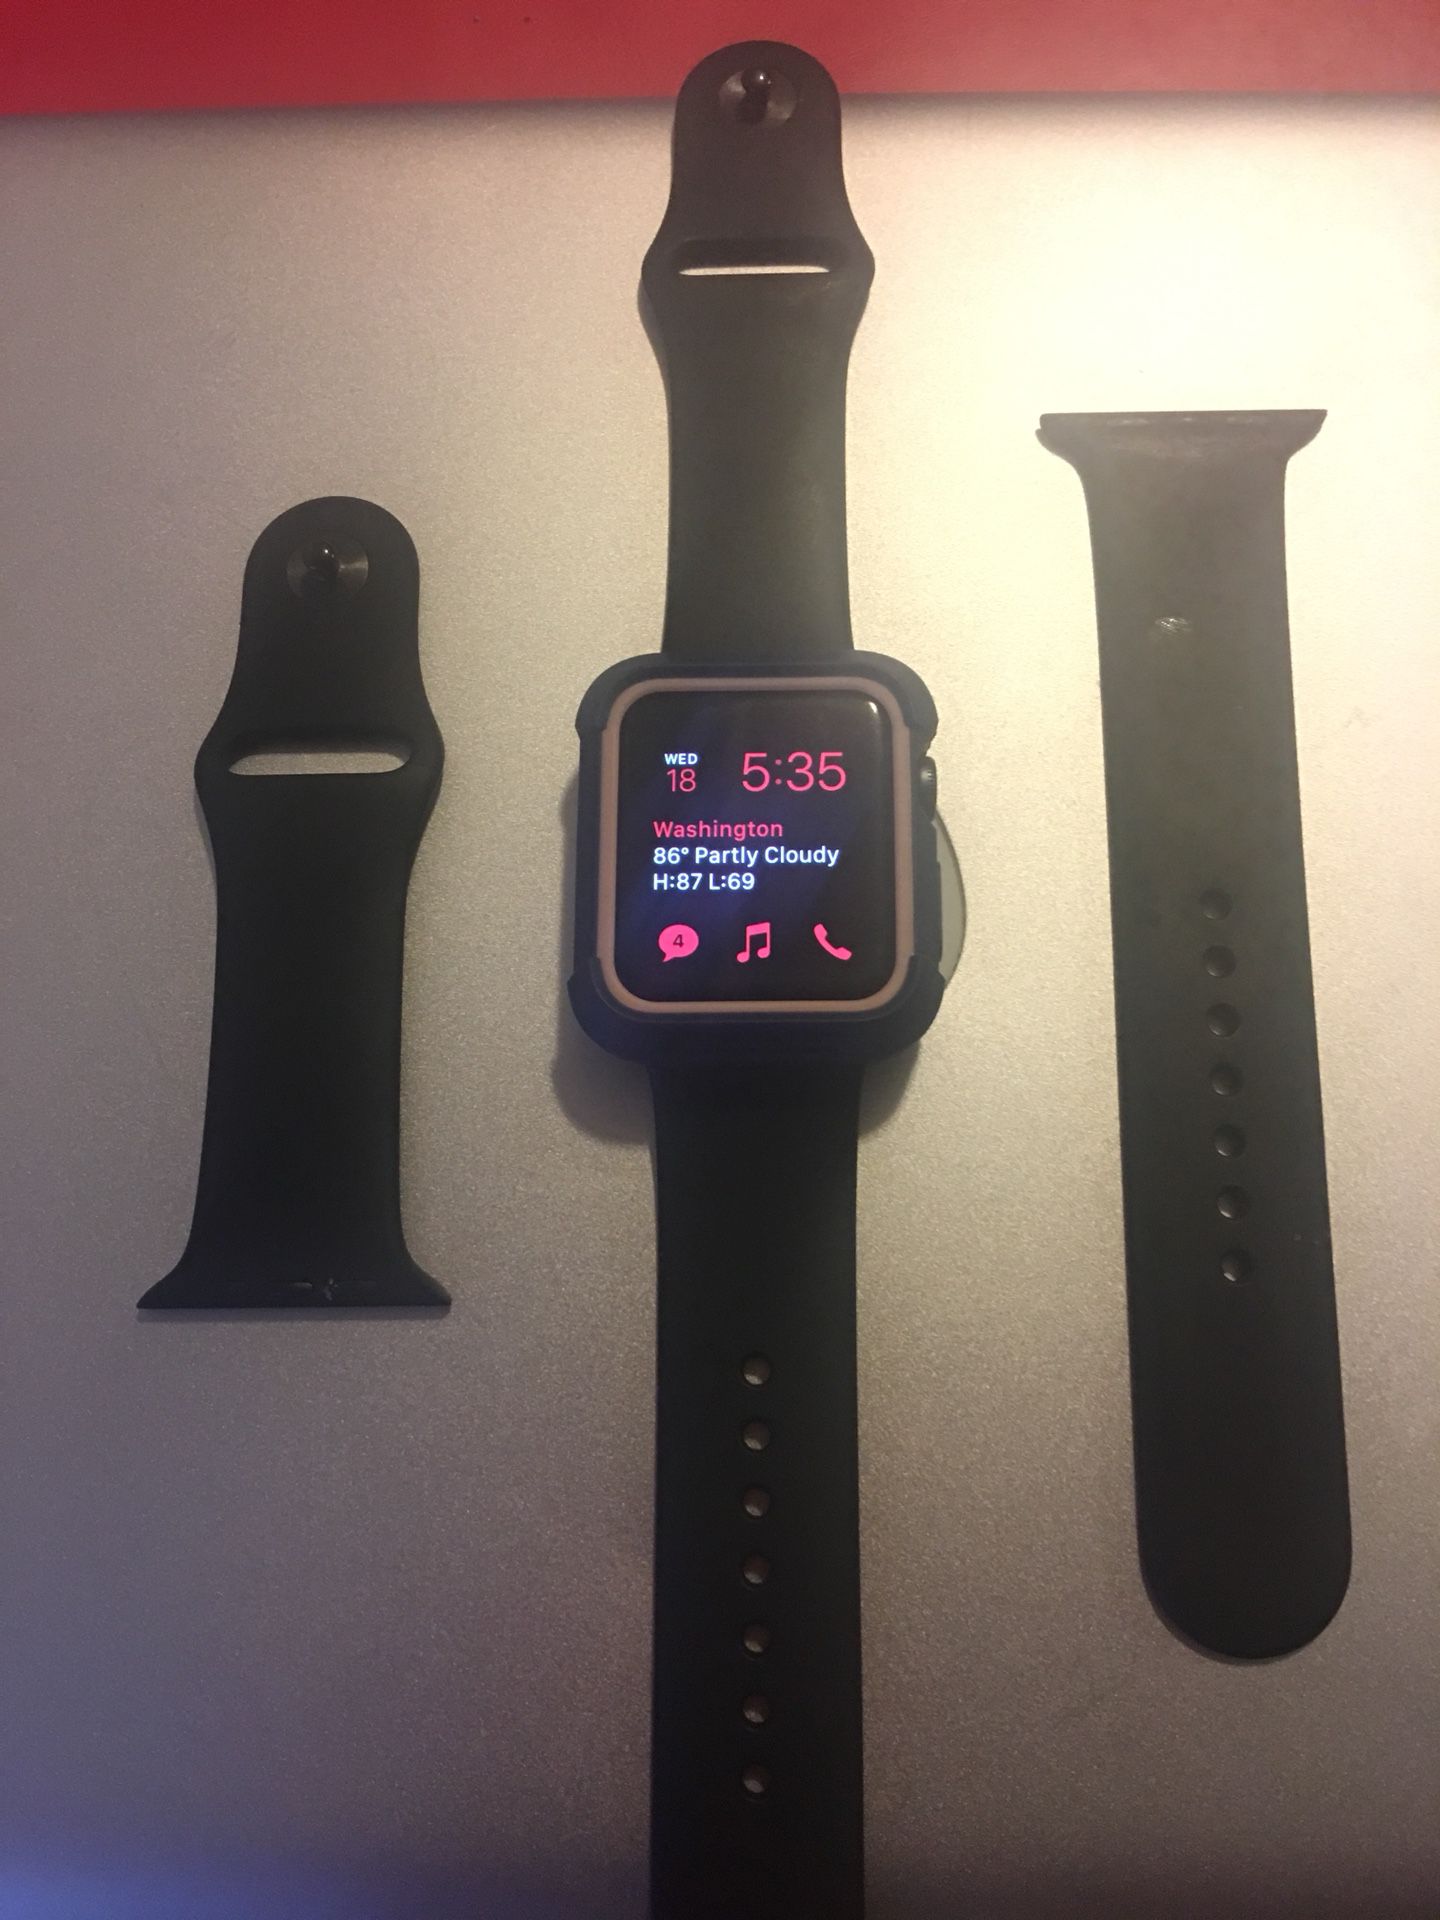 APPLE WATCH SERIES 2 42MM WATERPROOF WITH BANDS AND A PROTECTIVE CASE AND CHARGER